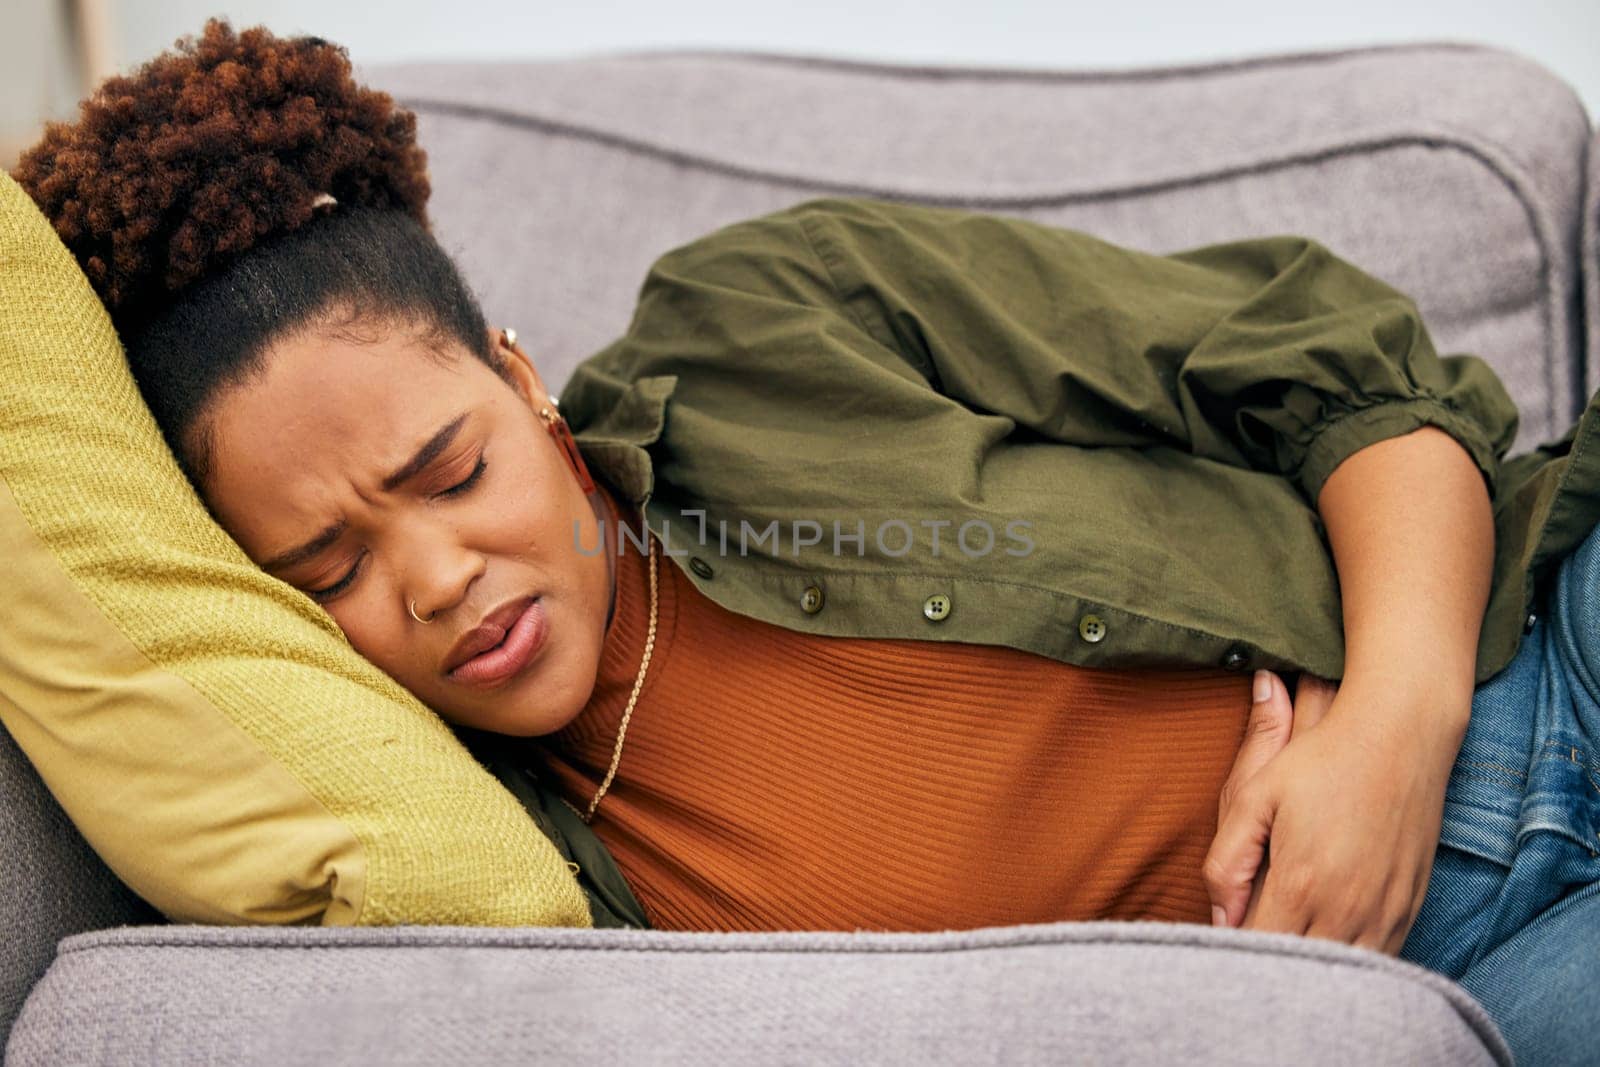 Sick woman, stomach pain and problem on sofa for ibs, health risk or nausea of gastric bloating, period cramps or virus. Black female person, menstruation or stress of constipation from endometriosis by YuriArcurs